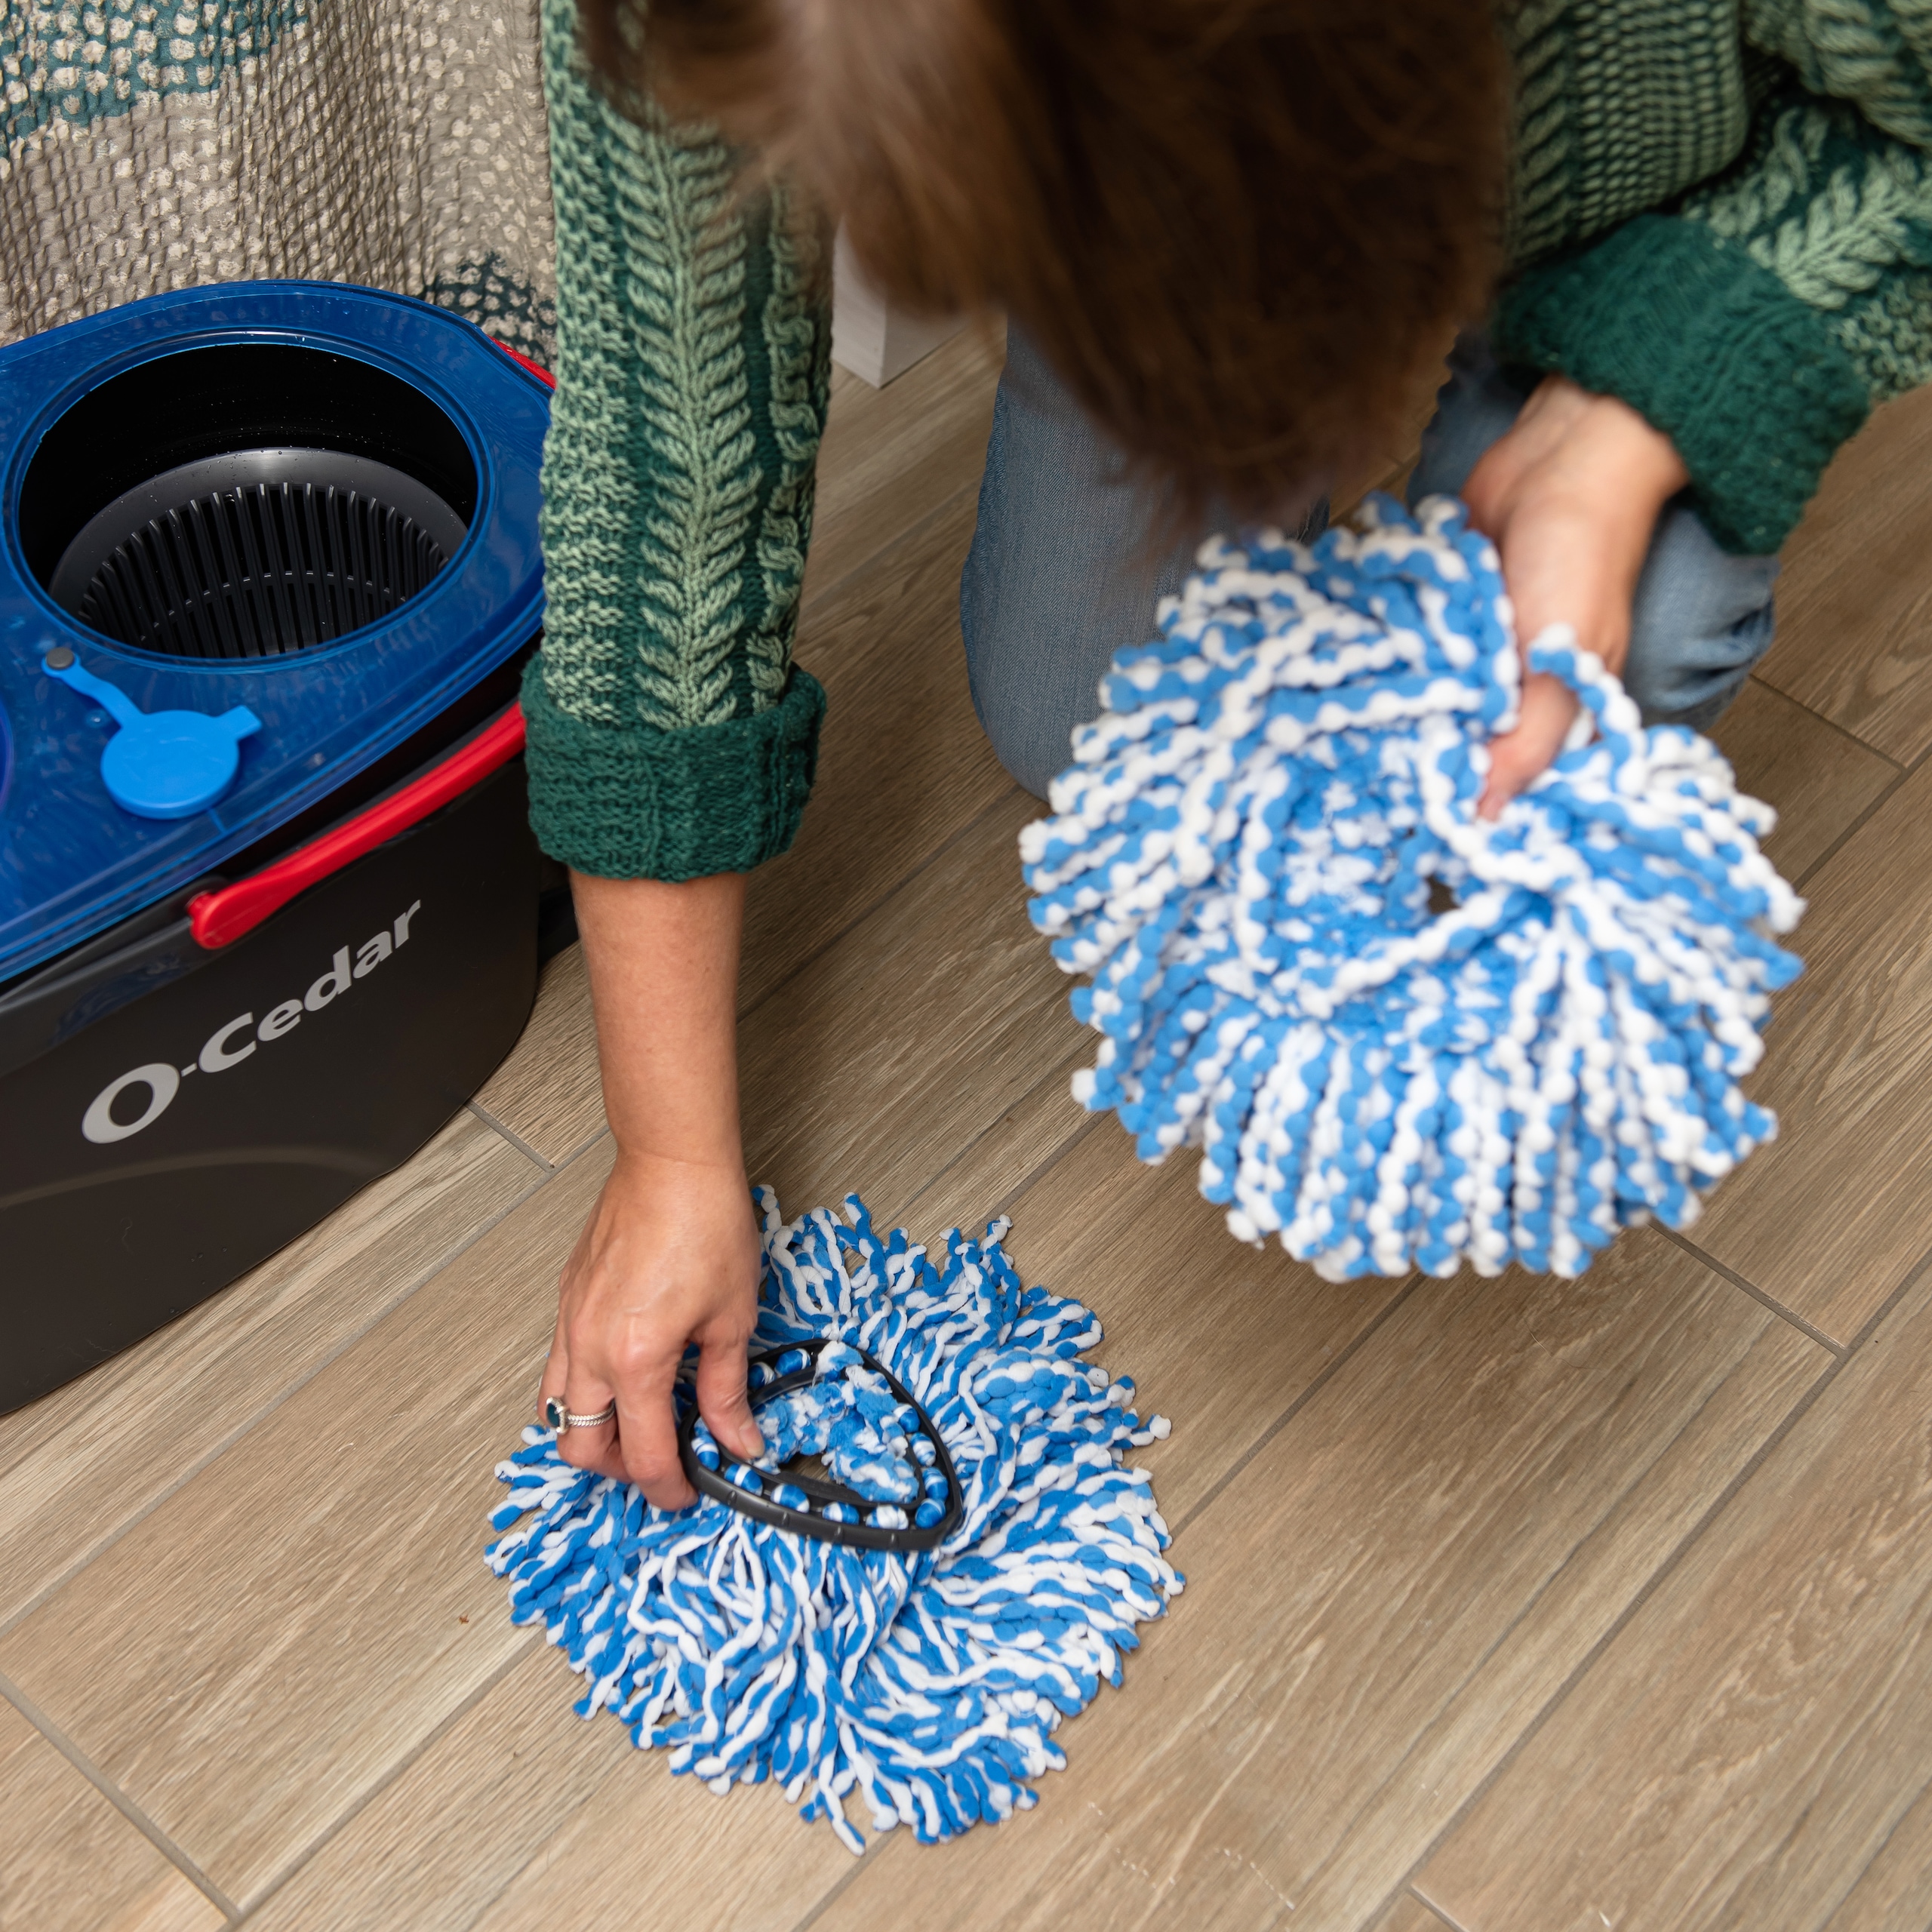 Make The Switch to Earth-Friendly Cleaning with Reusable Mop Refills